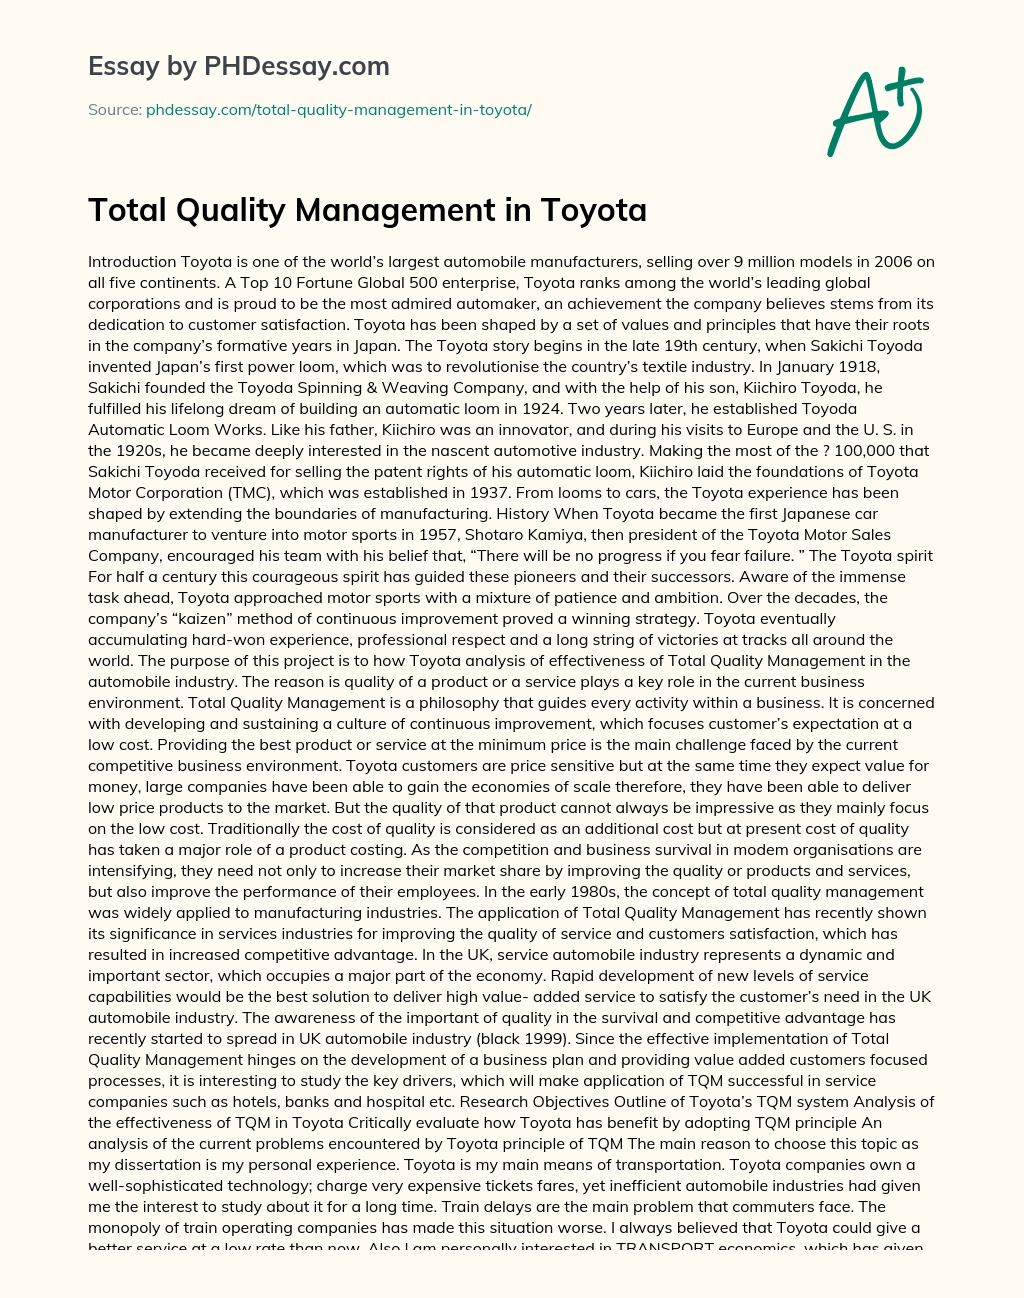 Total Quality Management in Toyota essay